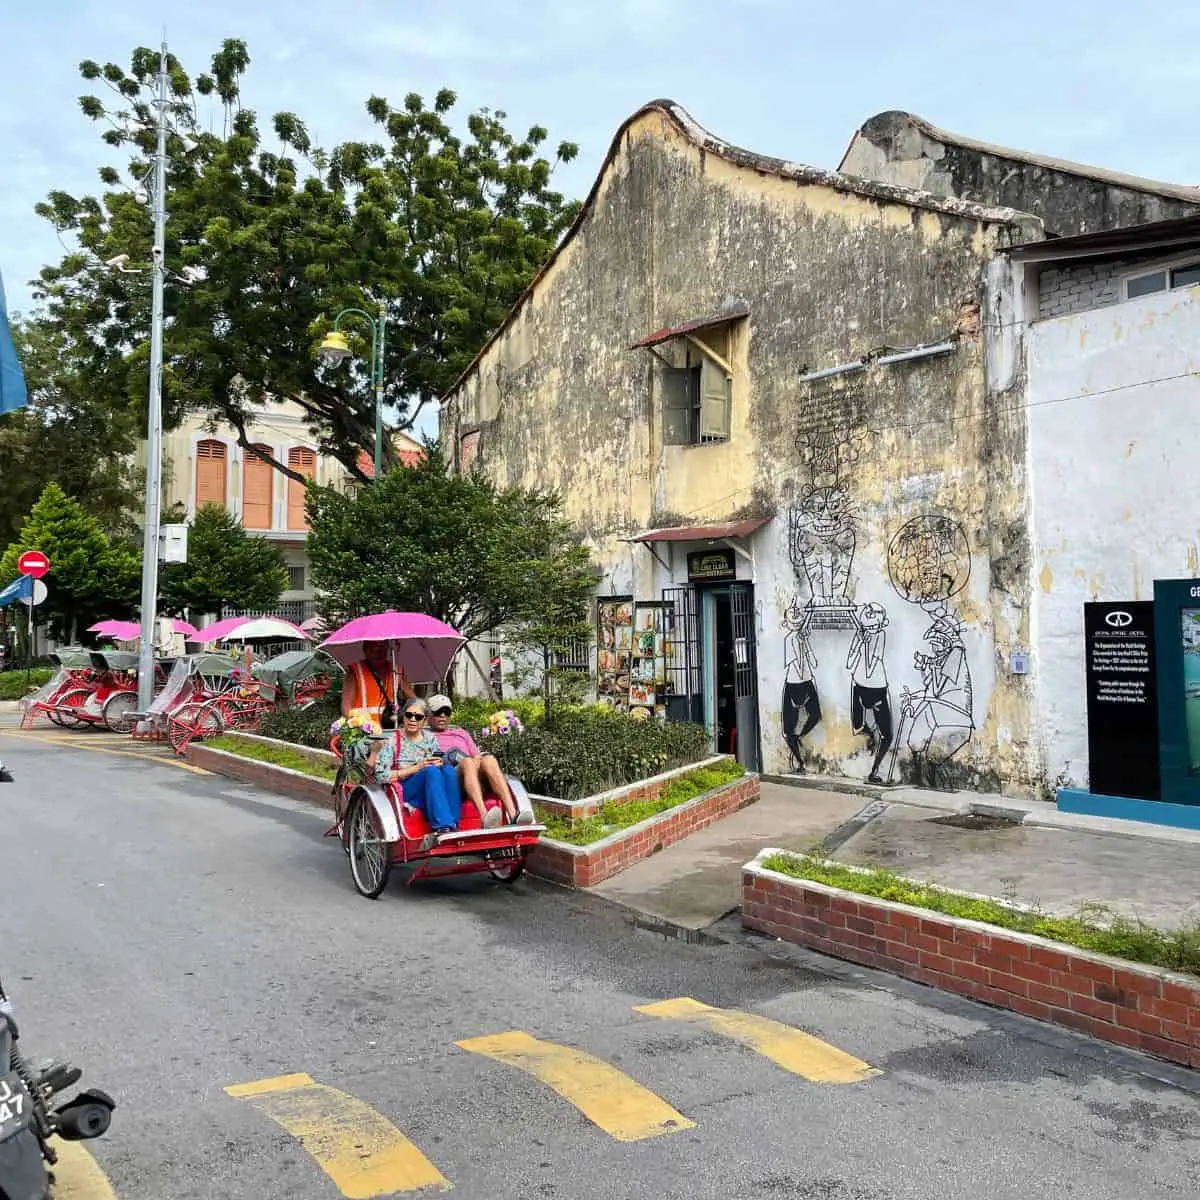 Trishaw ride to while seeing street art in George town Penang